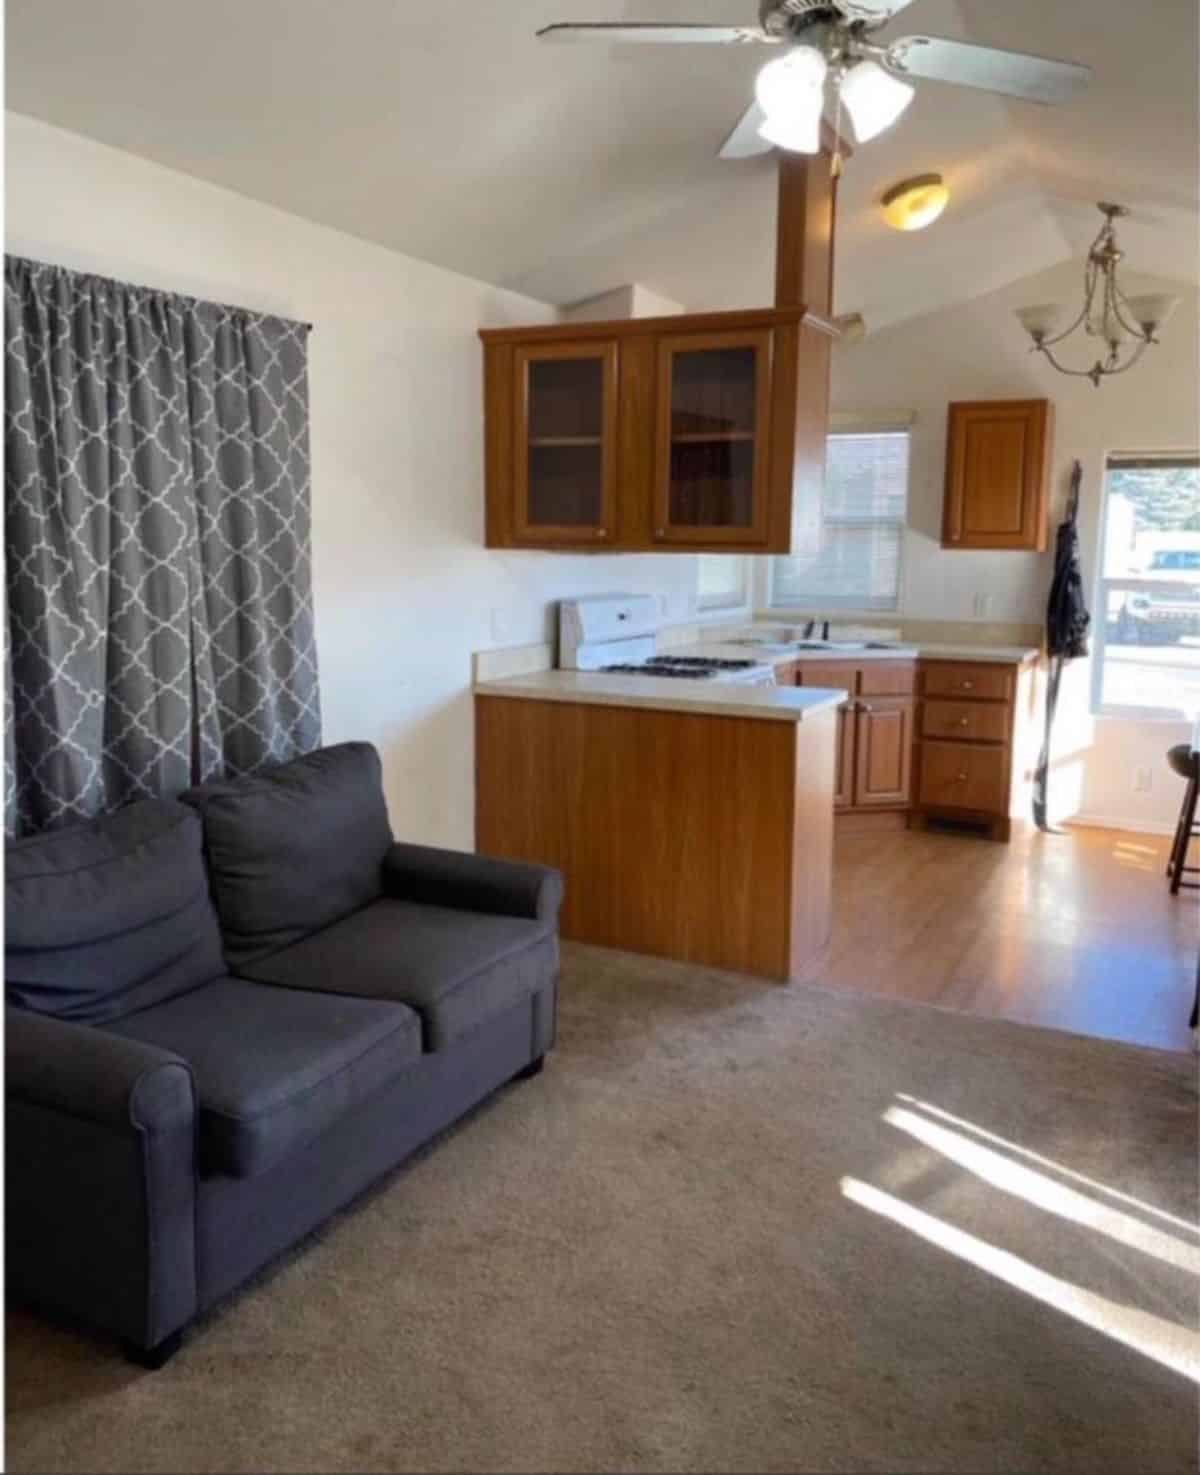 Living area of Modern Tiny House has a couch and huge space